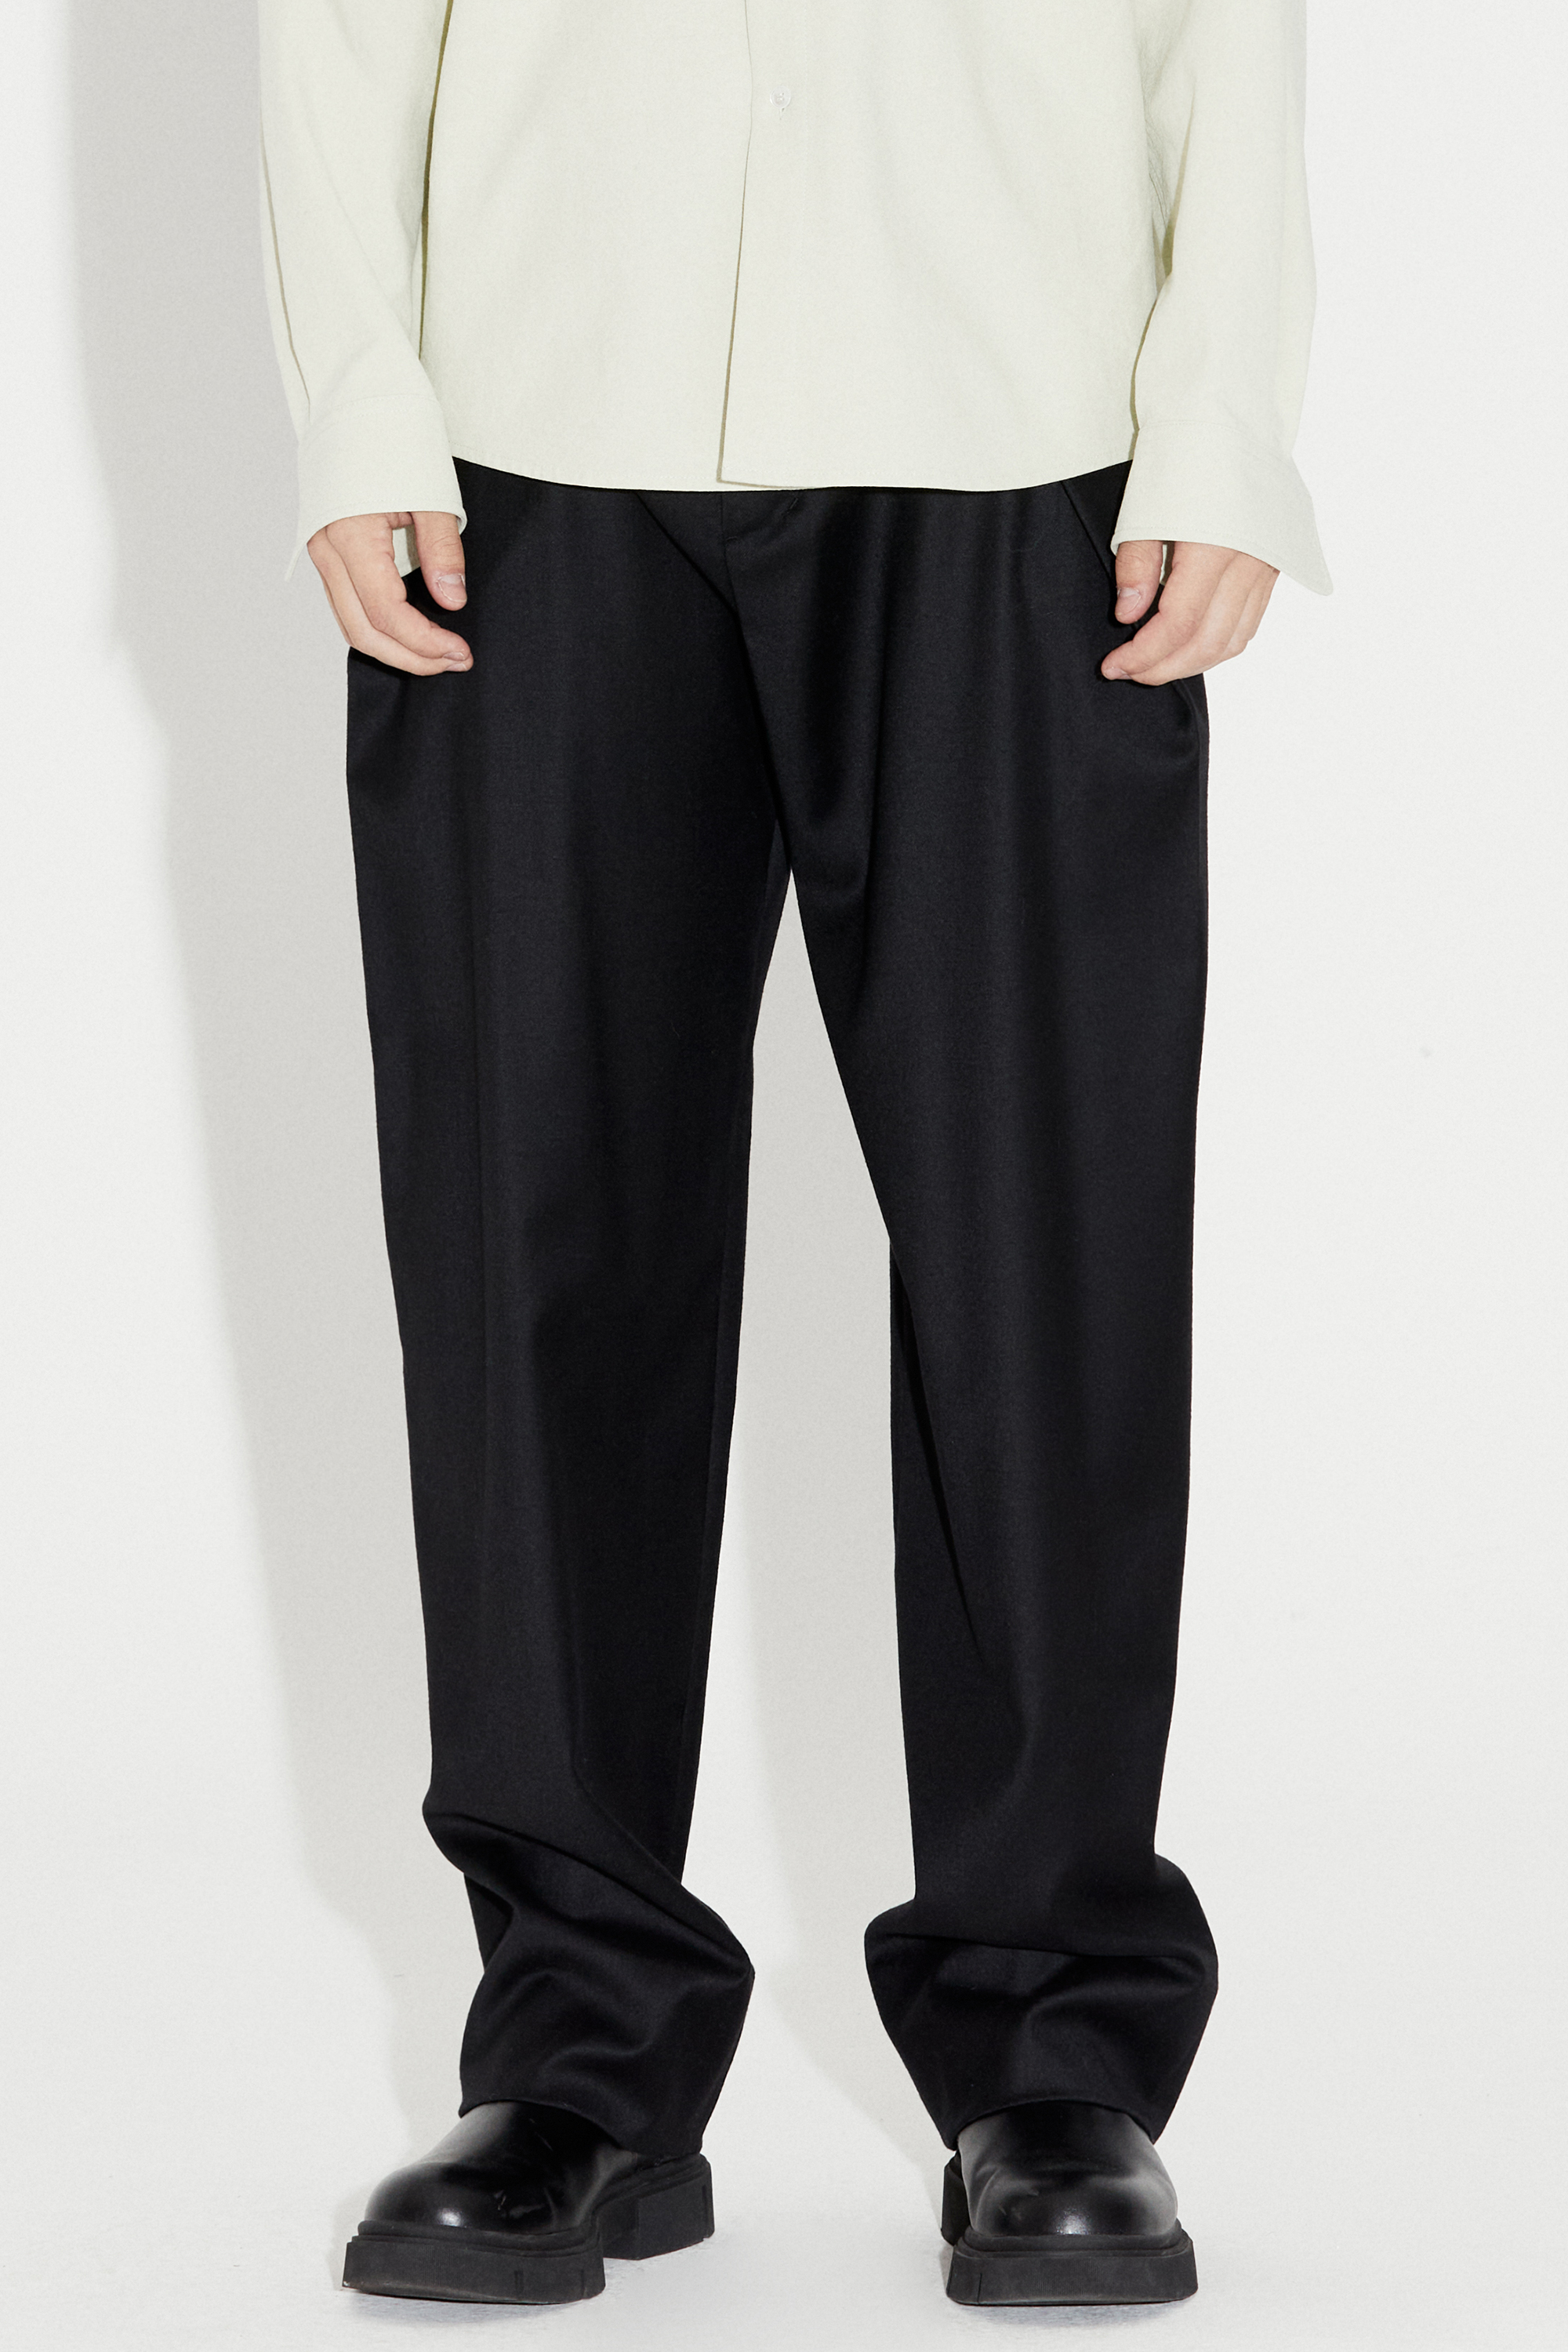 RELAXED BALLOON WOOL PANTS BLACK